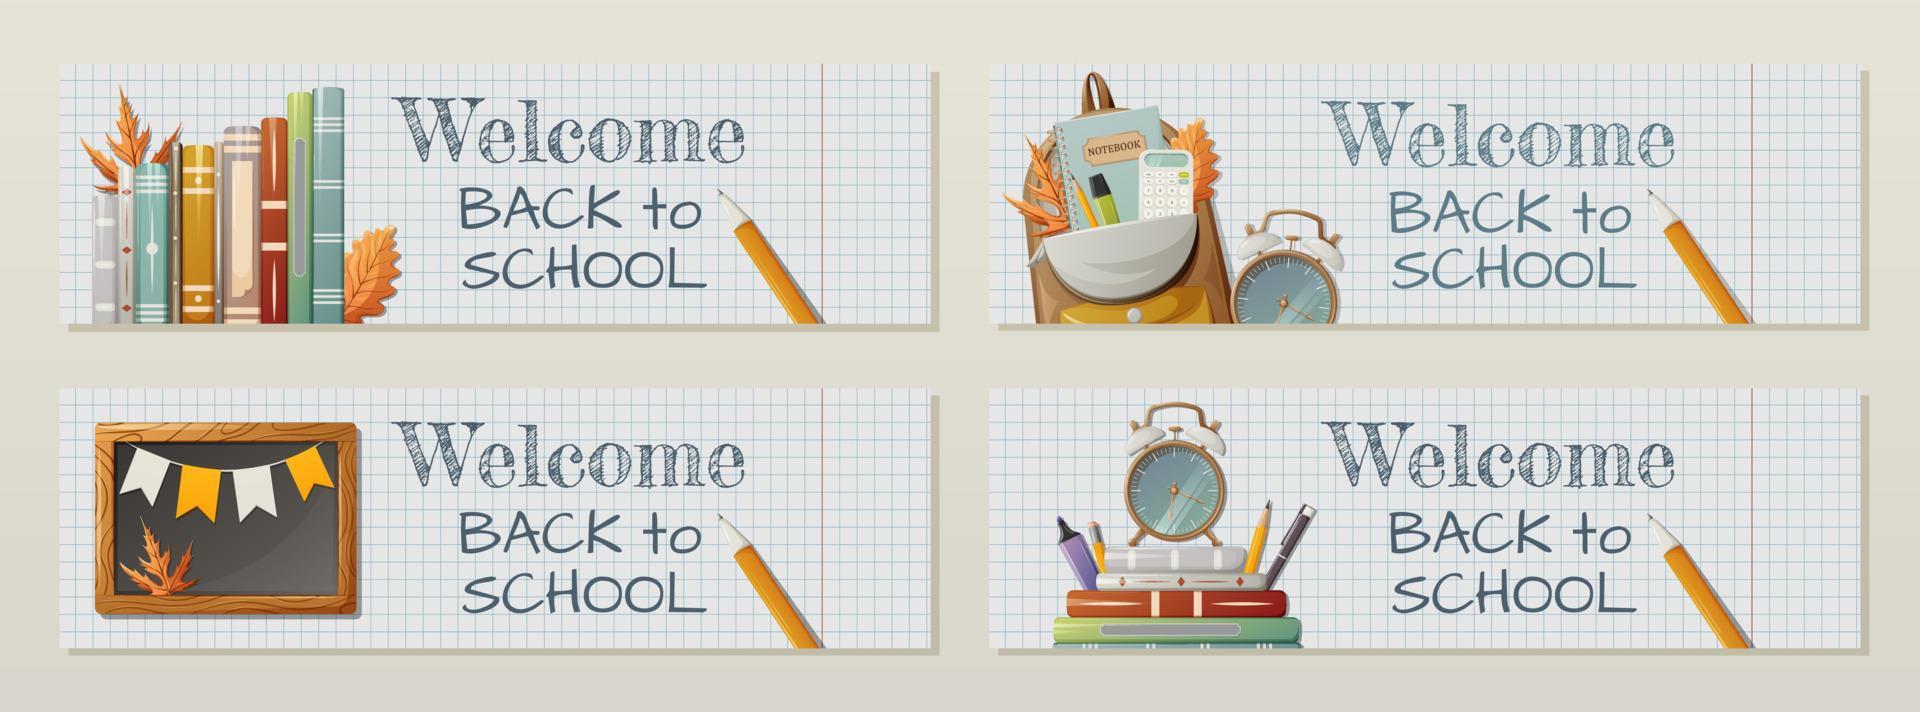 Set of horizontal banner, checkered notebook background. Welcome back to school text. Vector illustration. Books, backpack, alarm clock, stationery, chalkboard. For poster, flyer, website interface